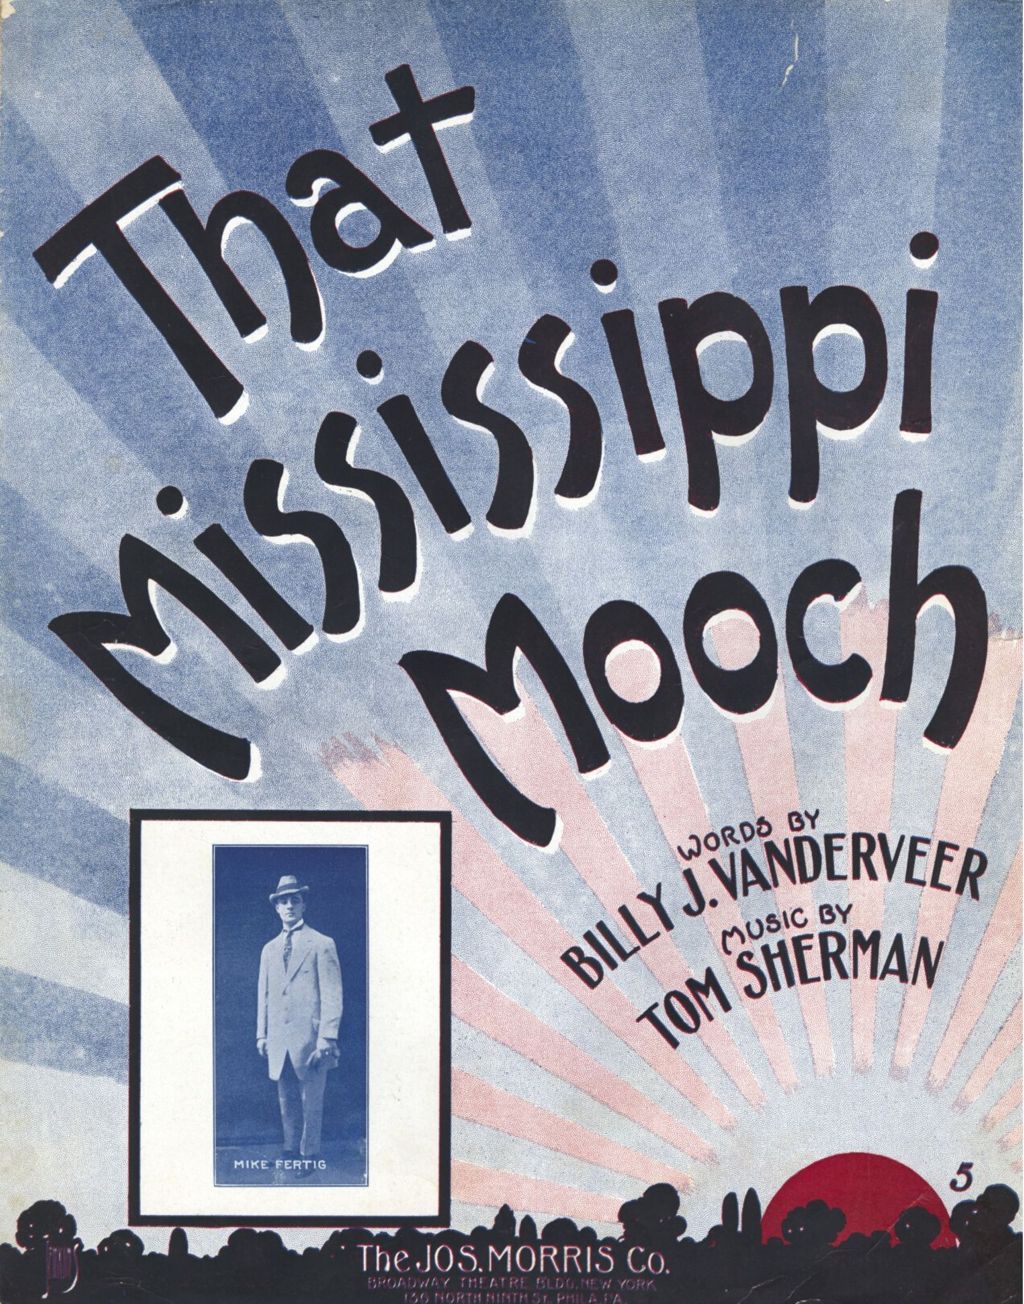 Miniature of That Mississippi Mooch